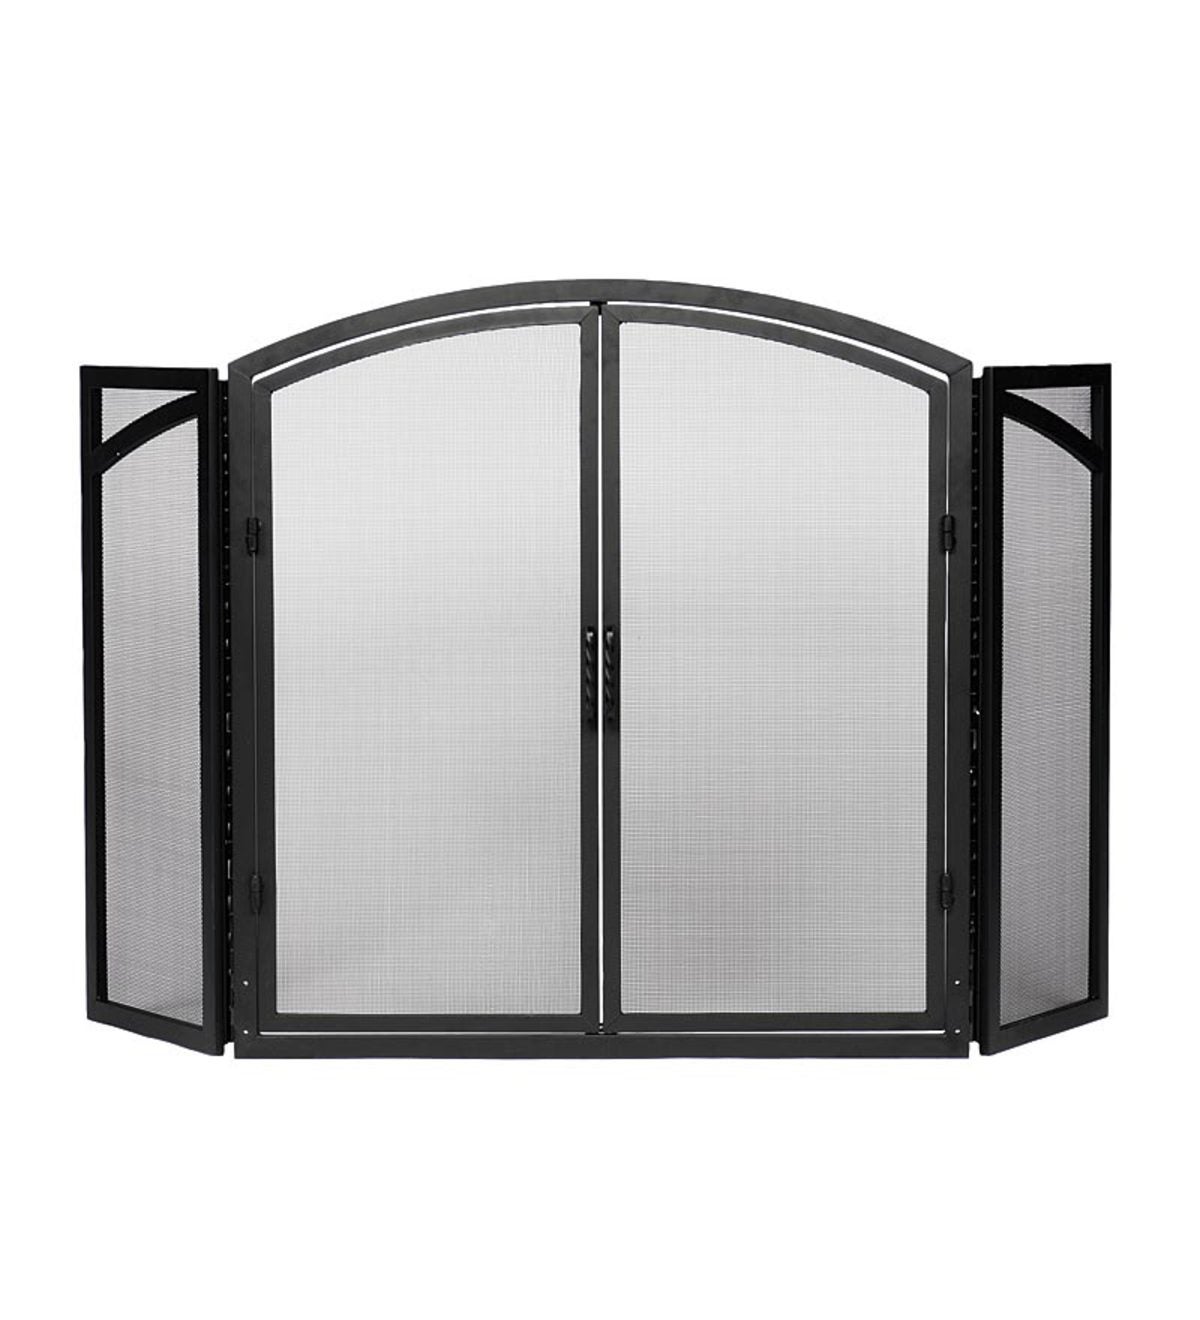 Arched Black Wrought Iron Tri Folding, Tri Fold Fireplace Screen With Doors